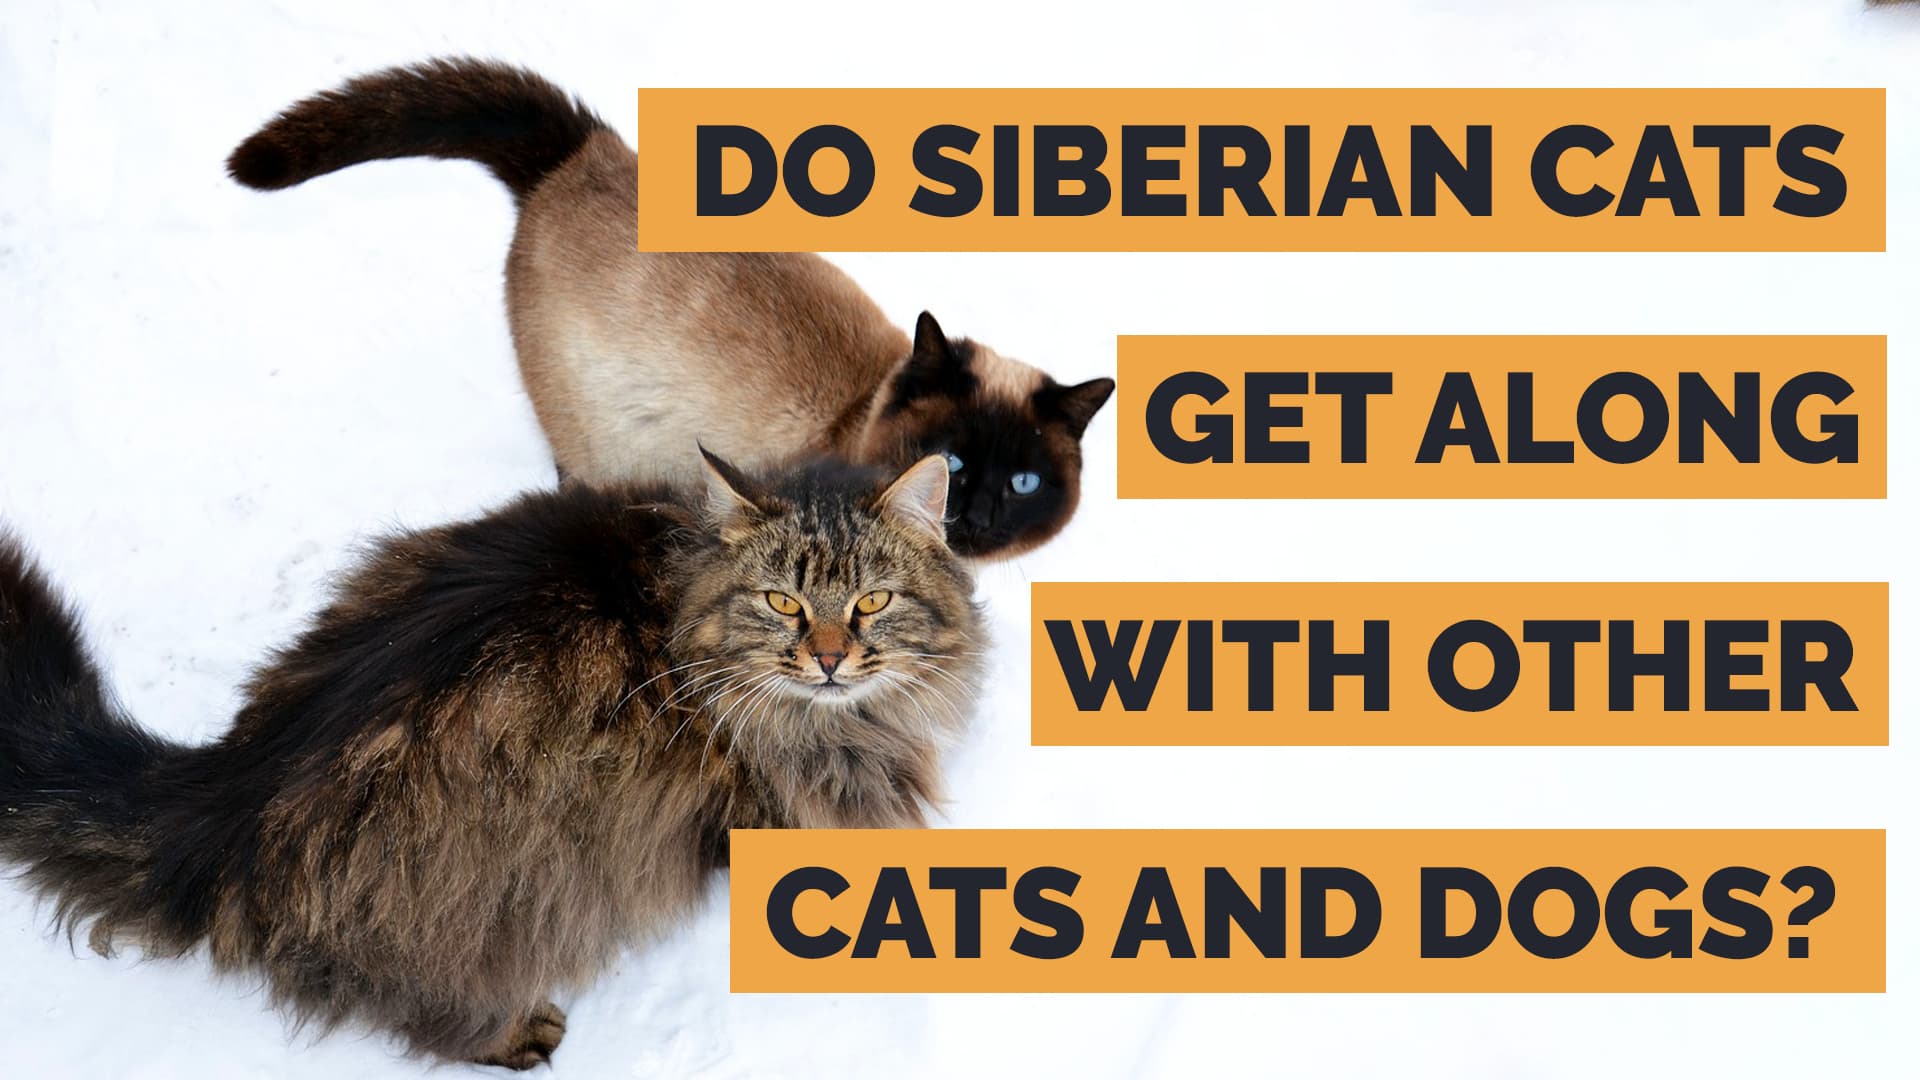 do siberian cats get along with dogs and other cats